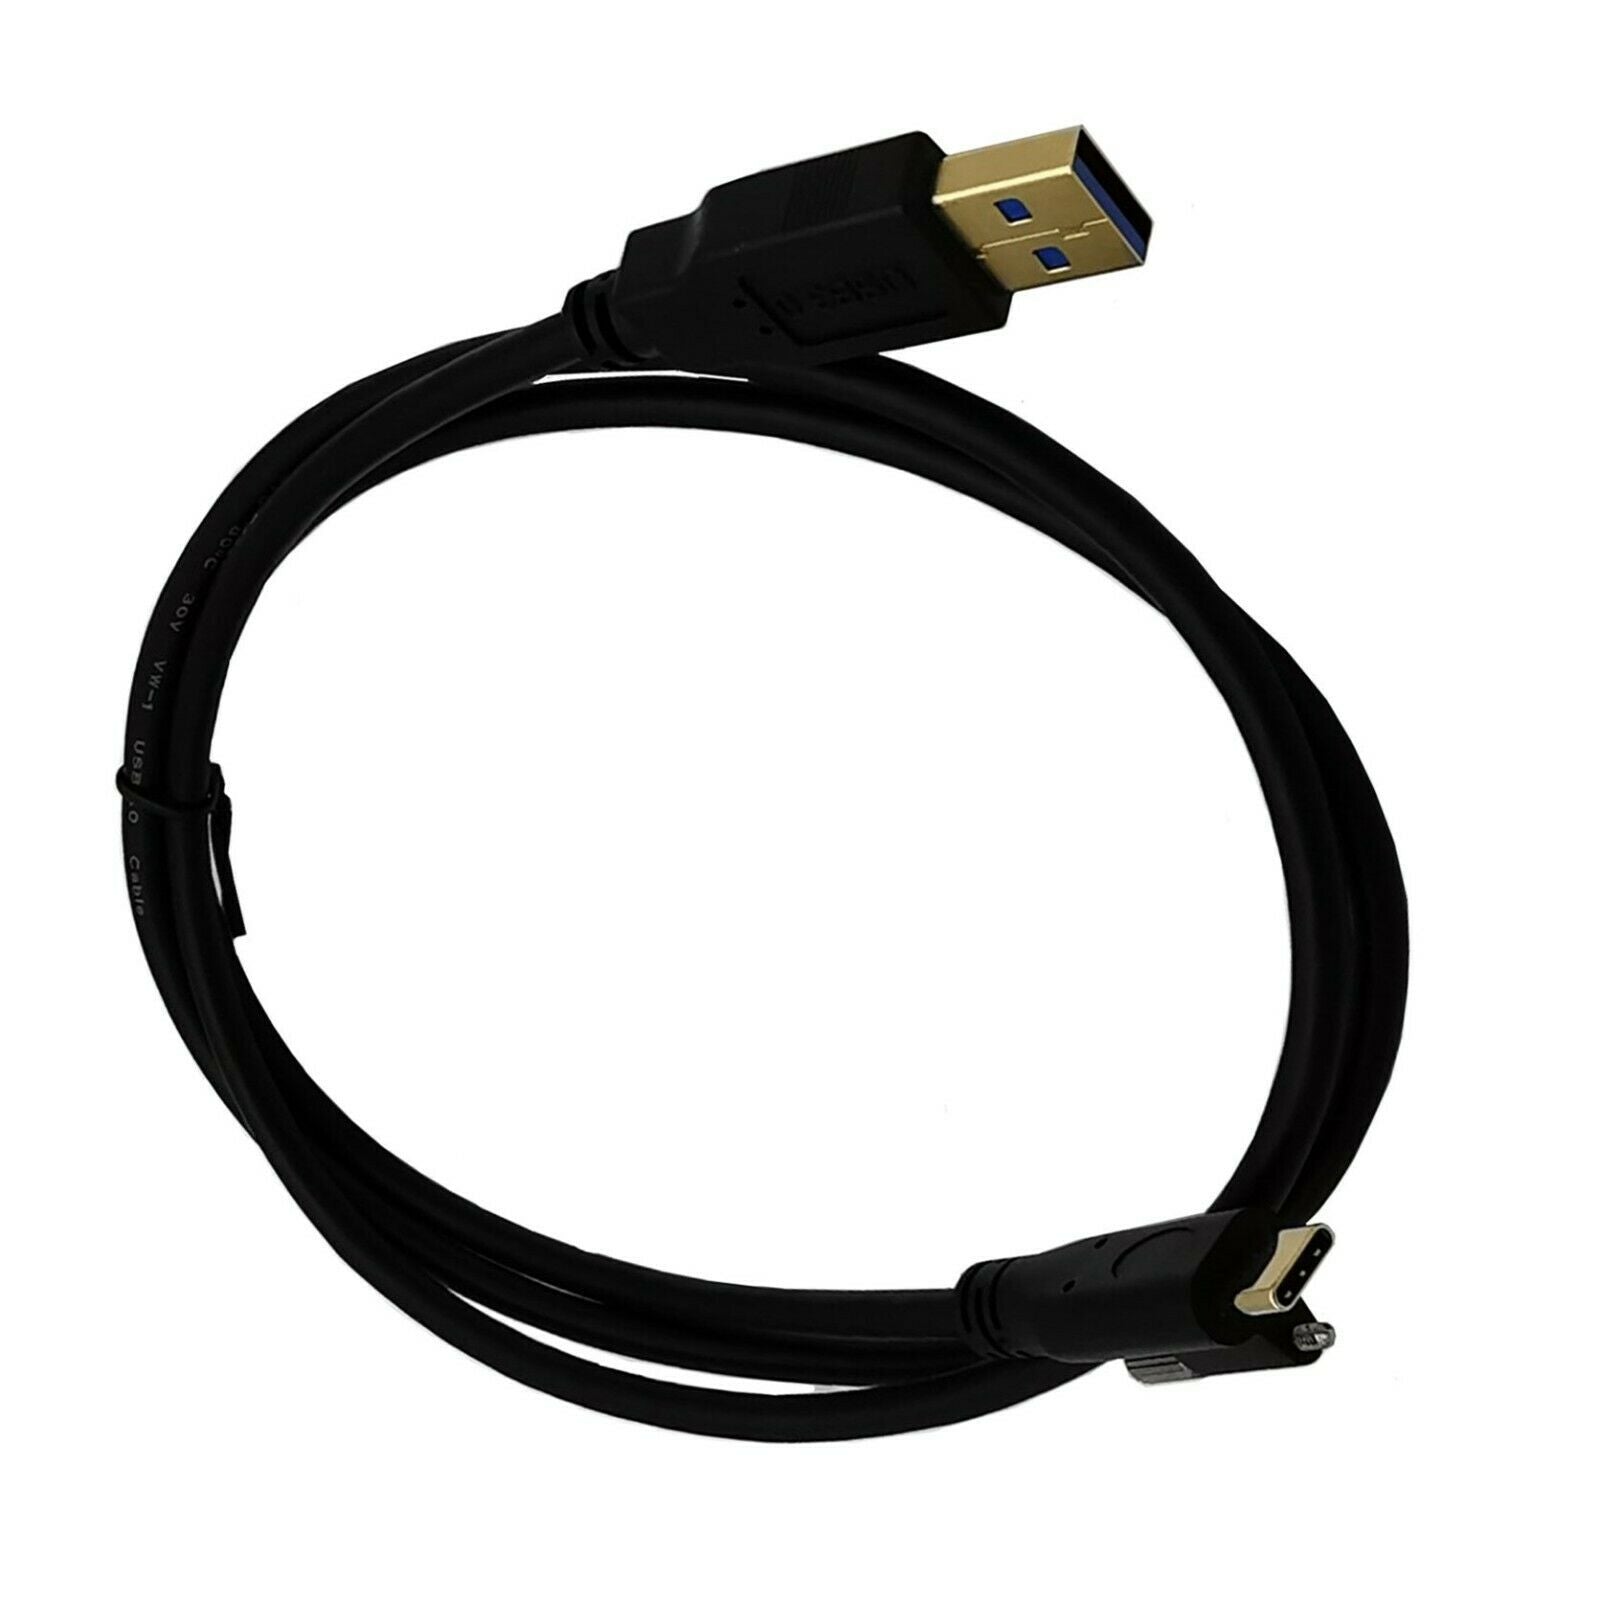 USB-A 3.0 Male to USB-C Male Single Screw Locking High Speed Cable